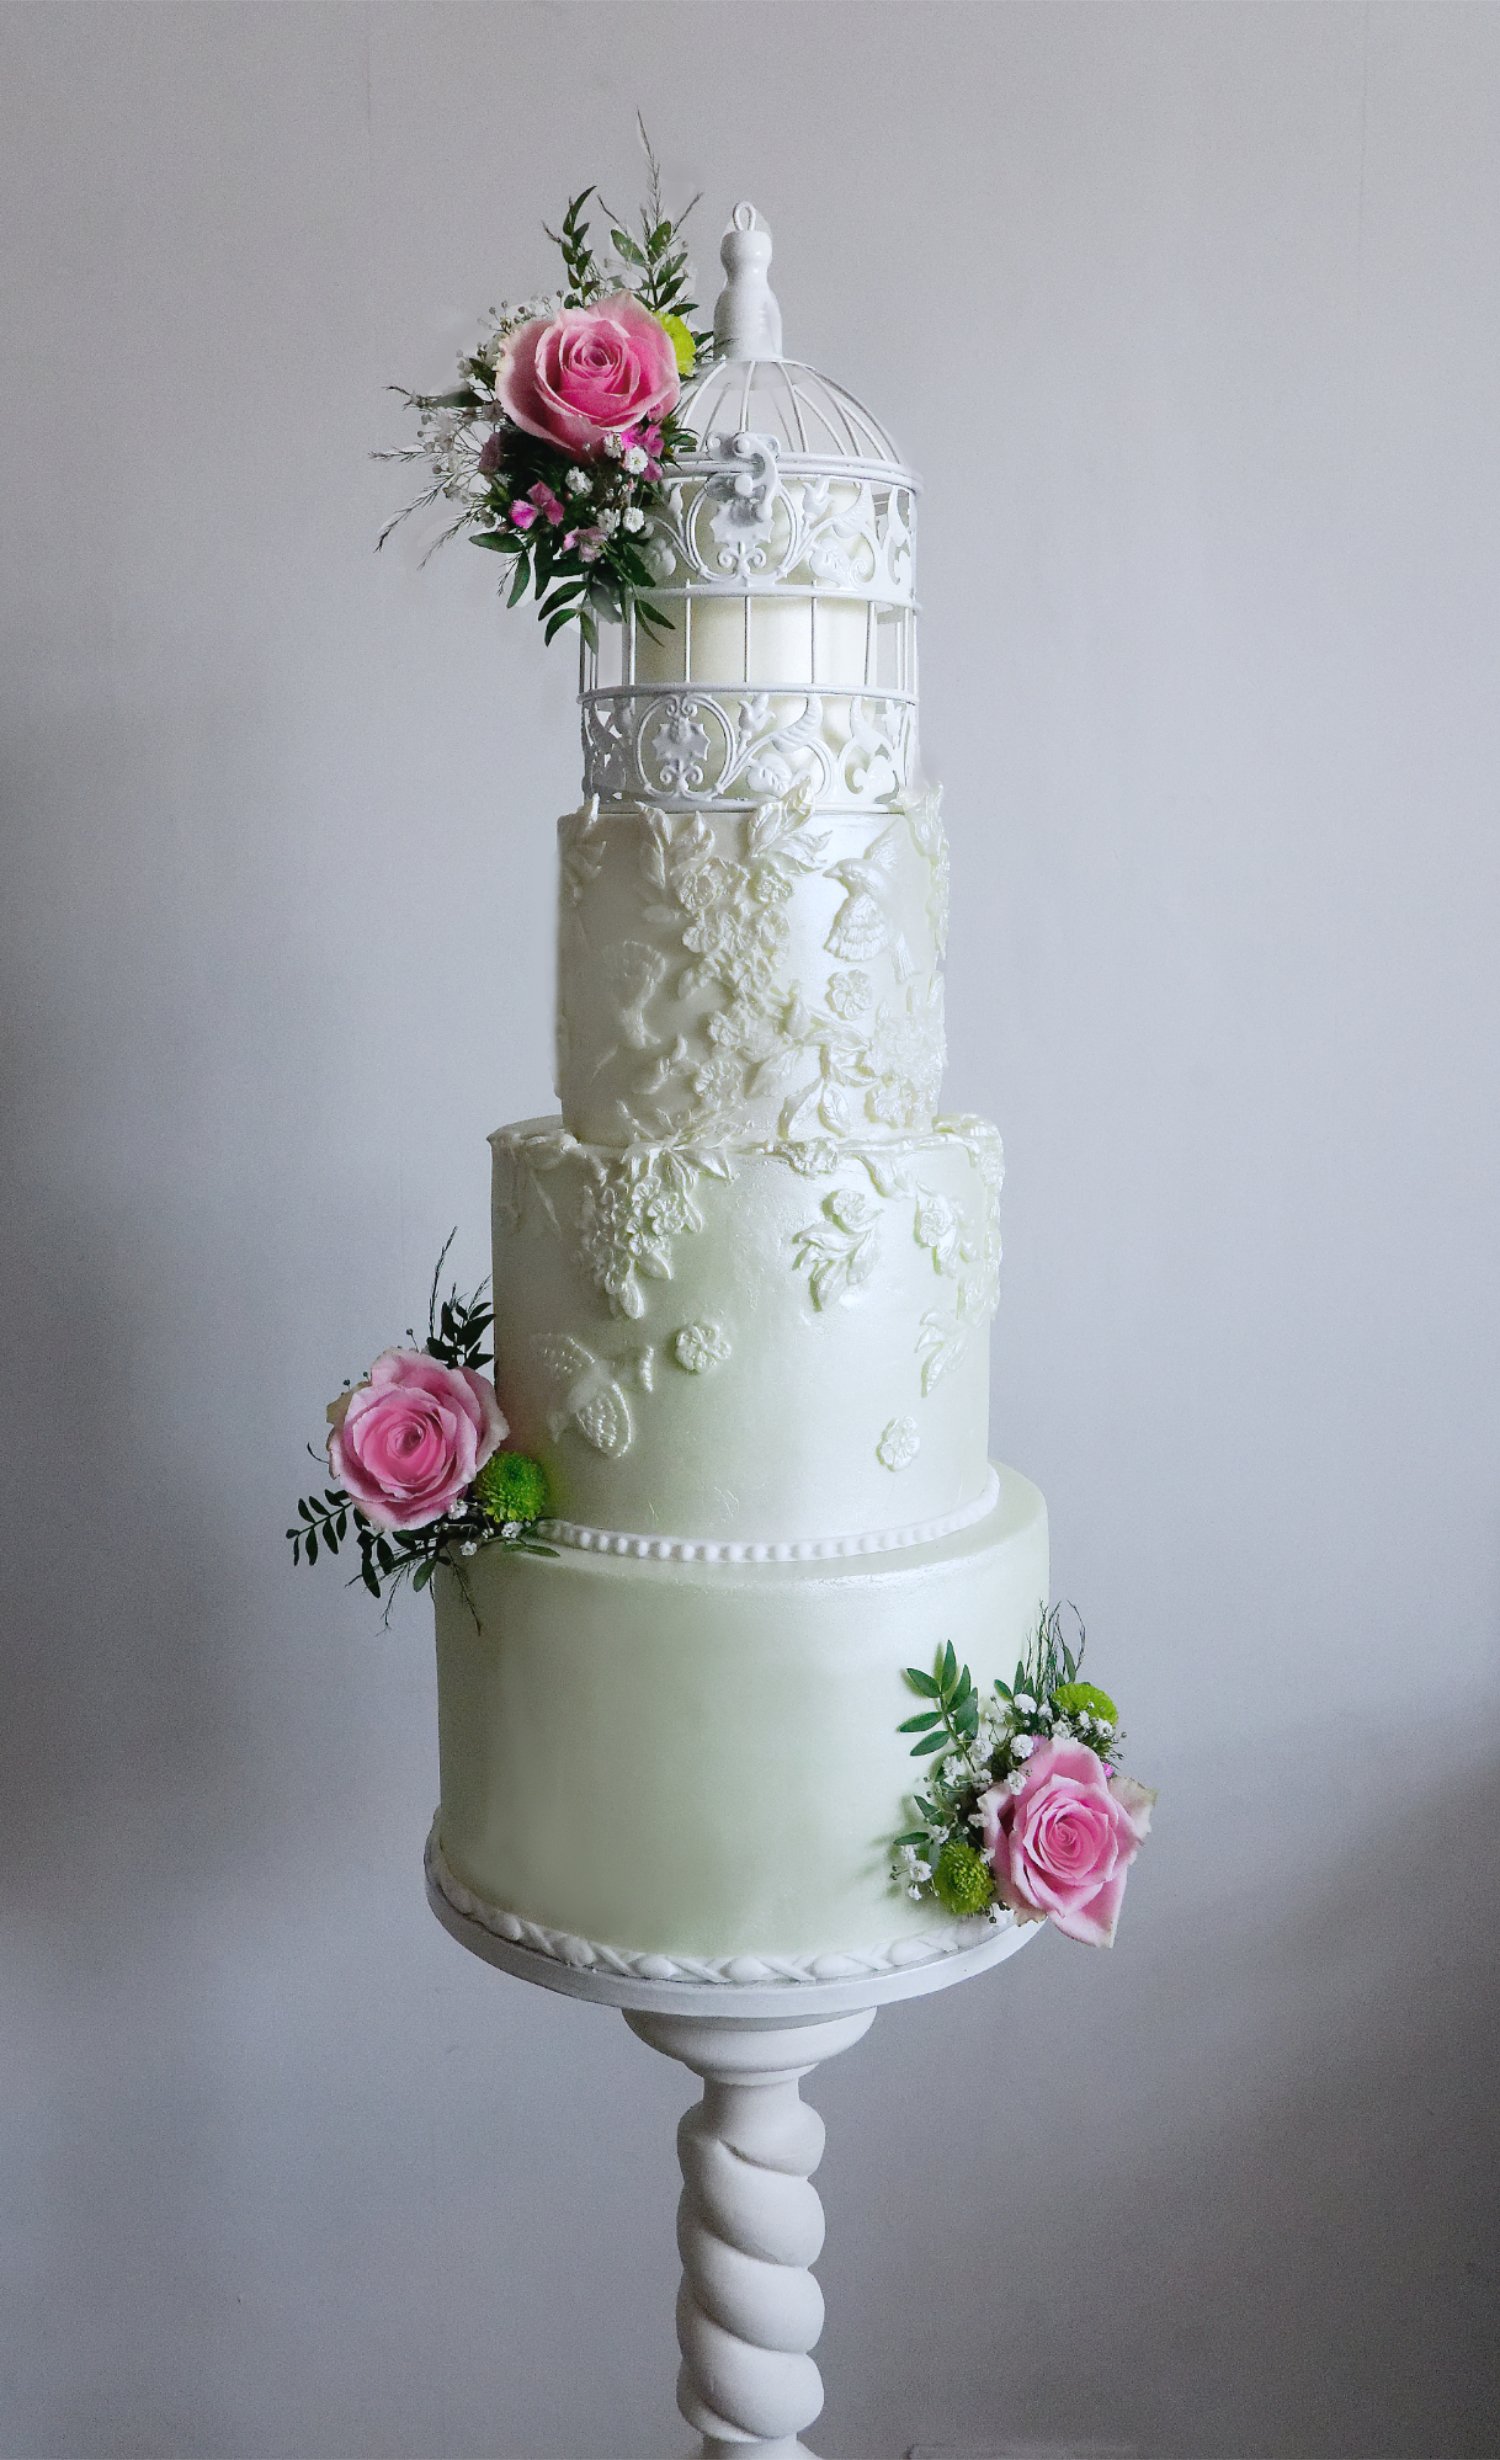 Birdcage wedding cake with bas relief detailing and retro feel. Fresh floral decoration.